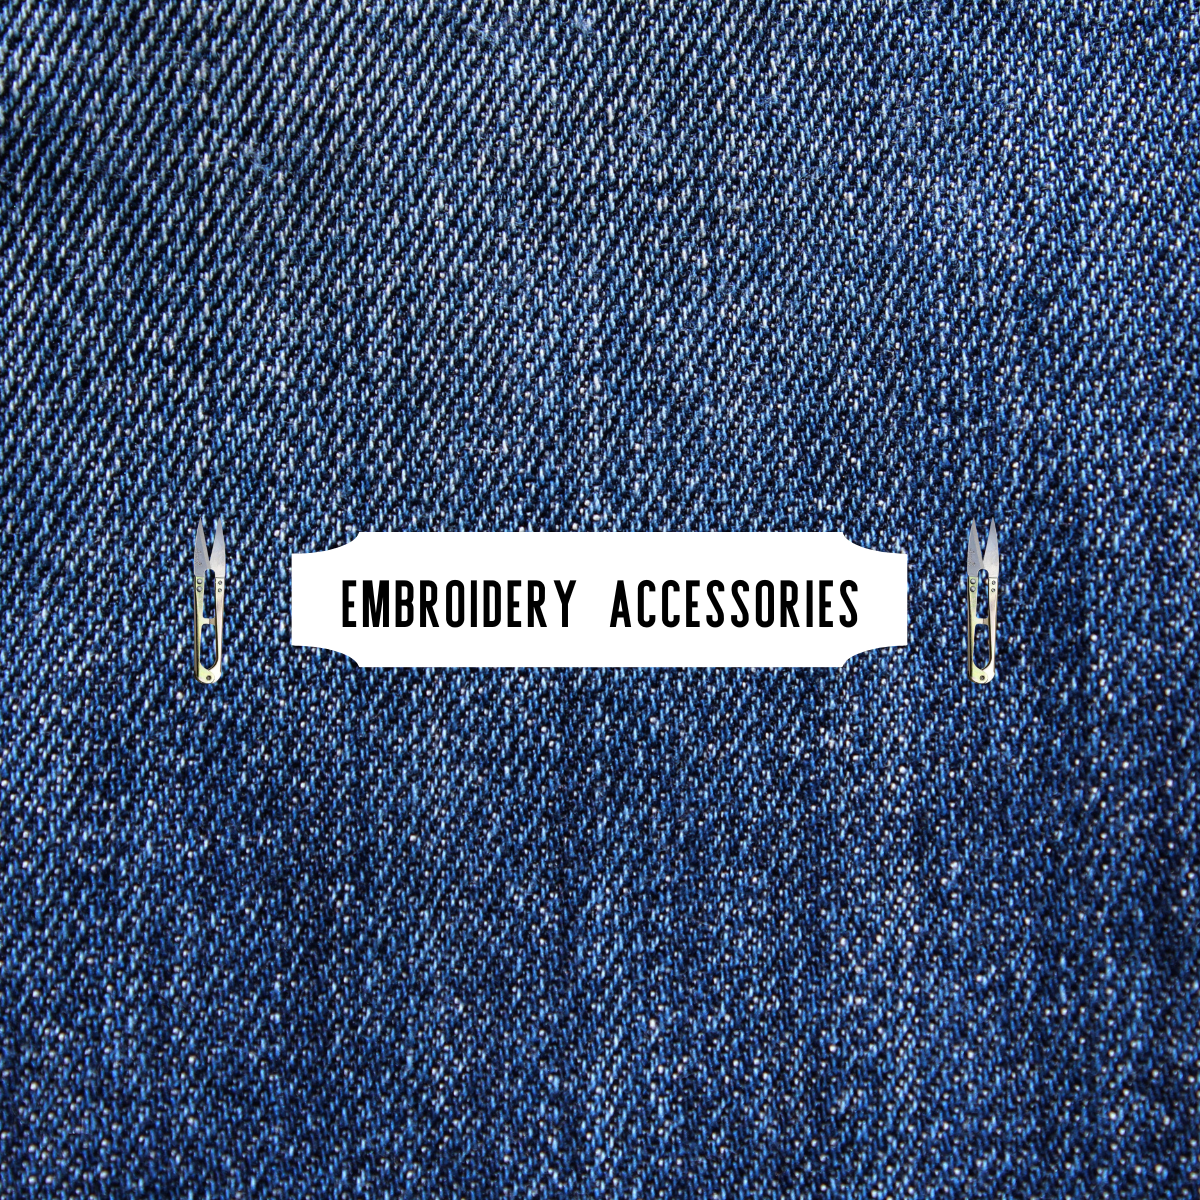 Embroidery Accessories